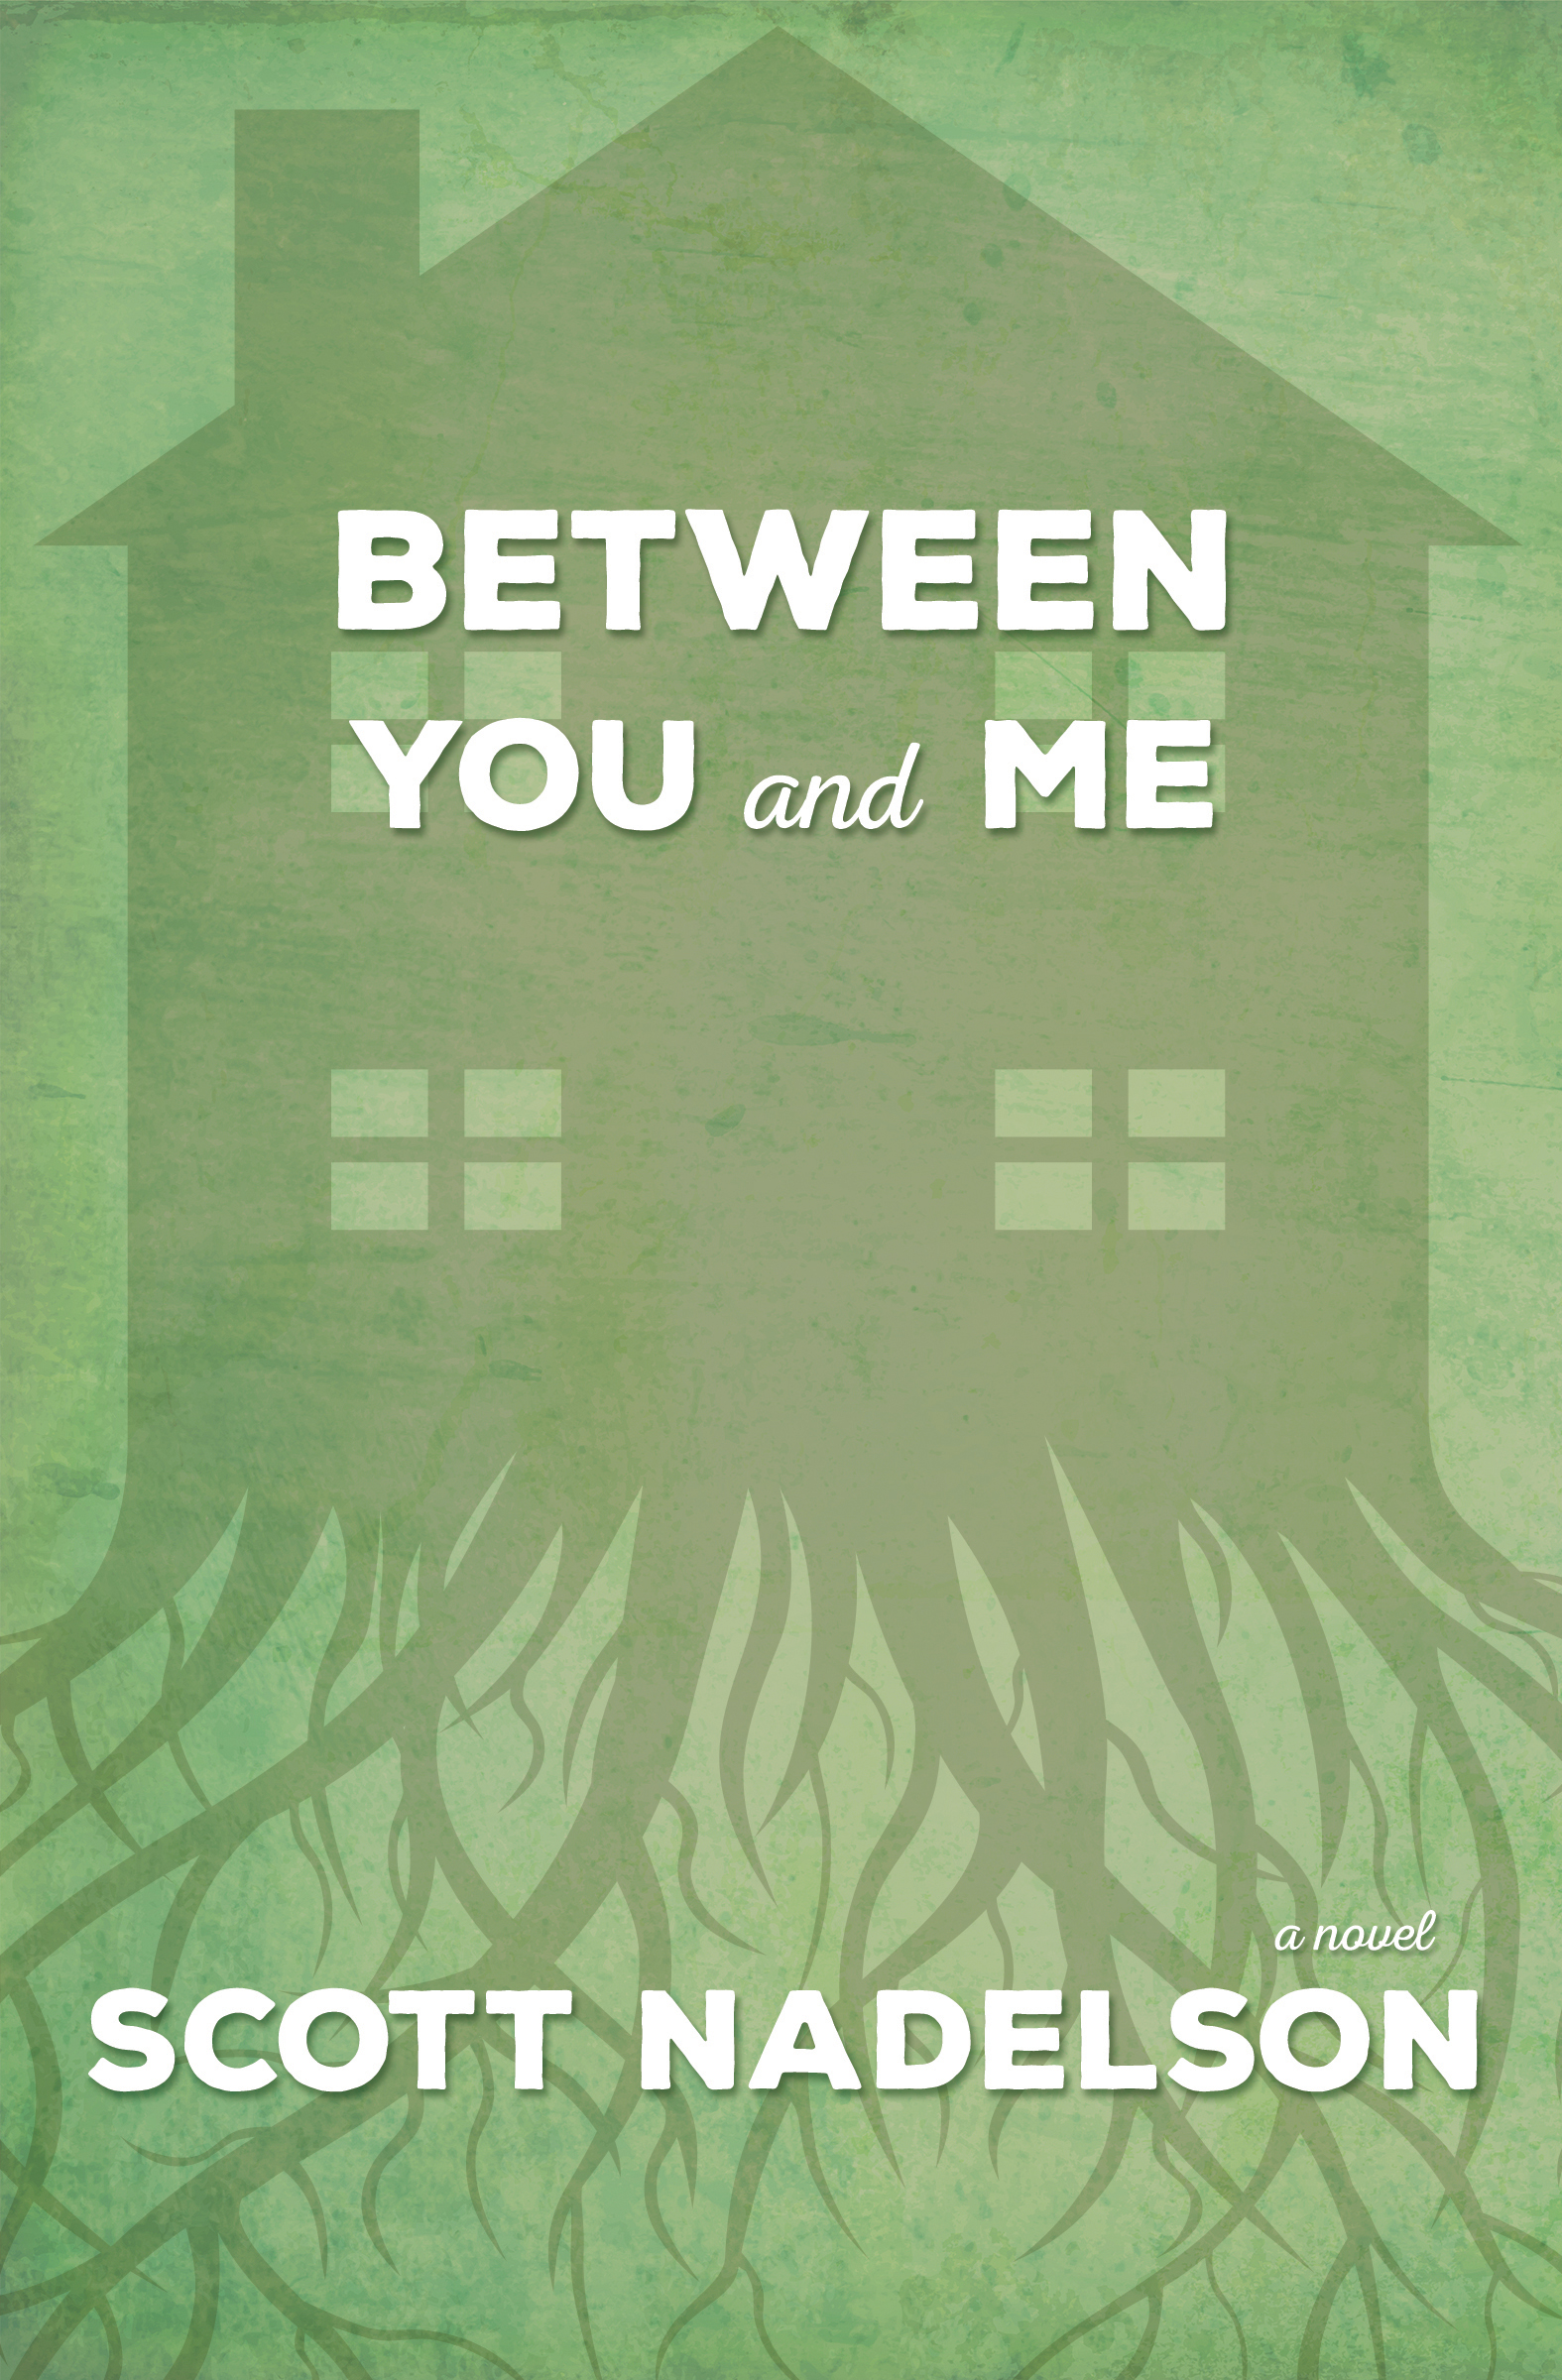 Between You and Me: a novel by Scott Nadelson